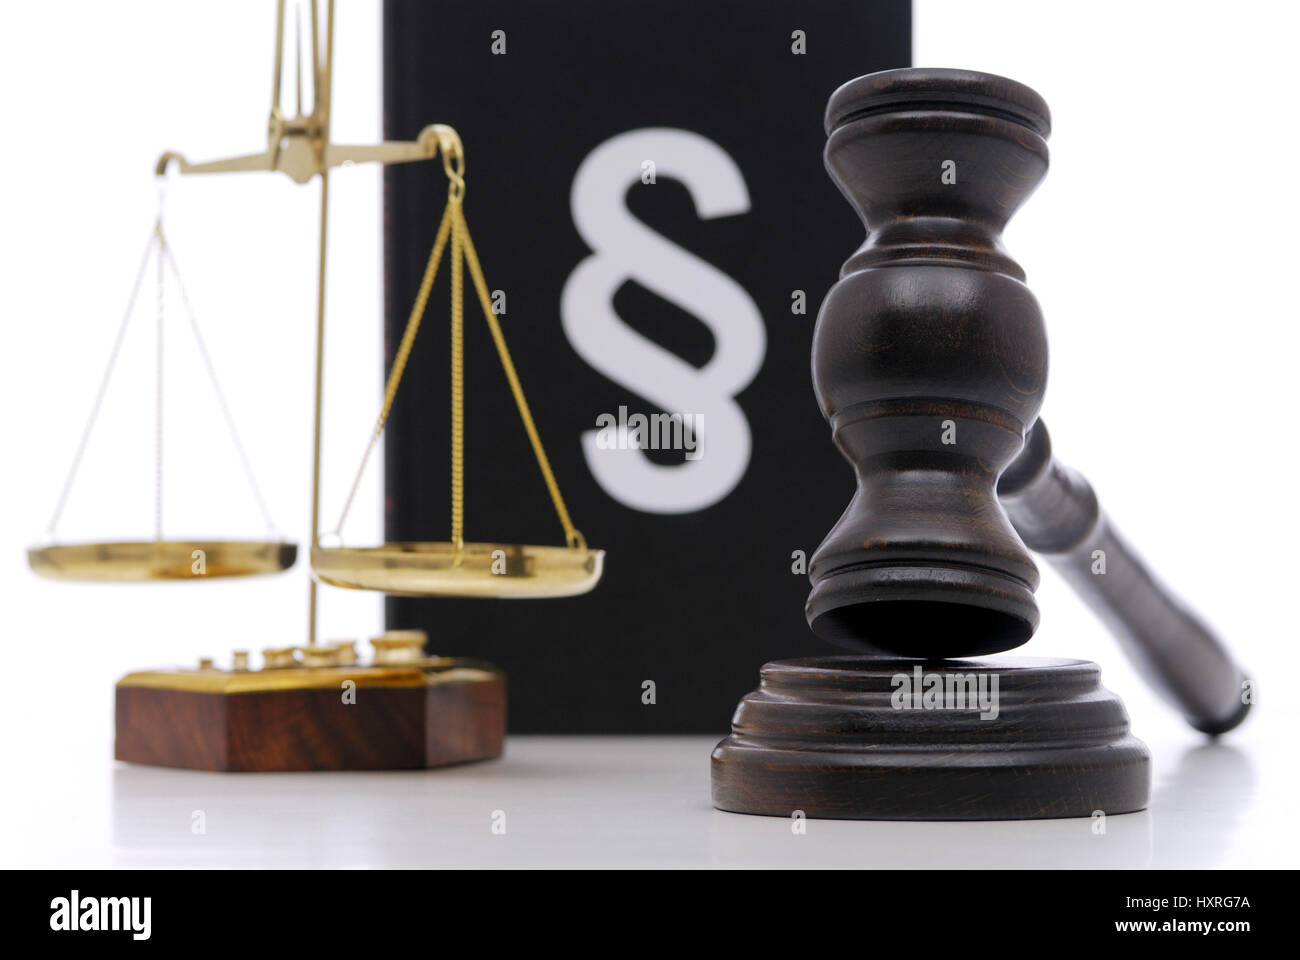 Law, laws, legislation, justice, justice, judgment, judgments, judicial system, judge, court, courts, section, section, judge's hammer, scales, law bo Stock Photo